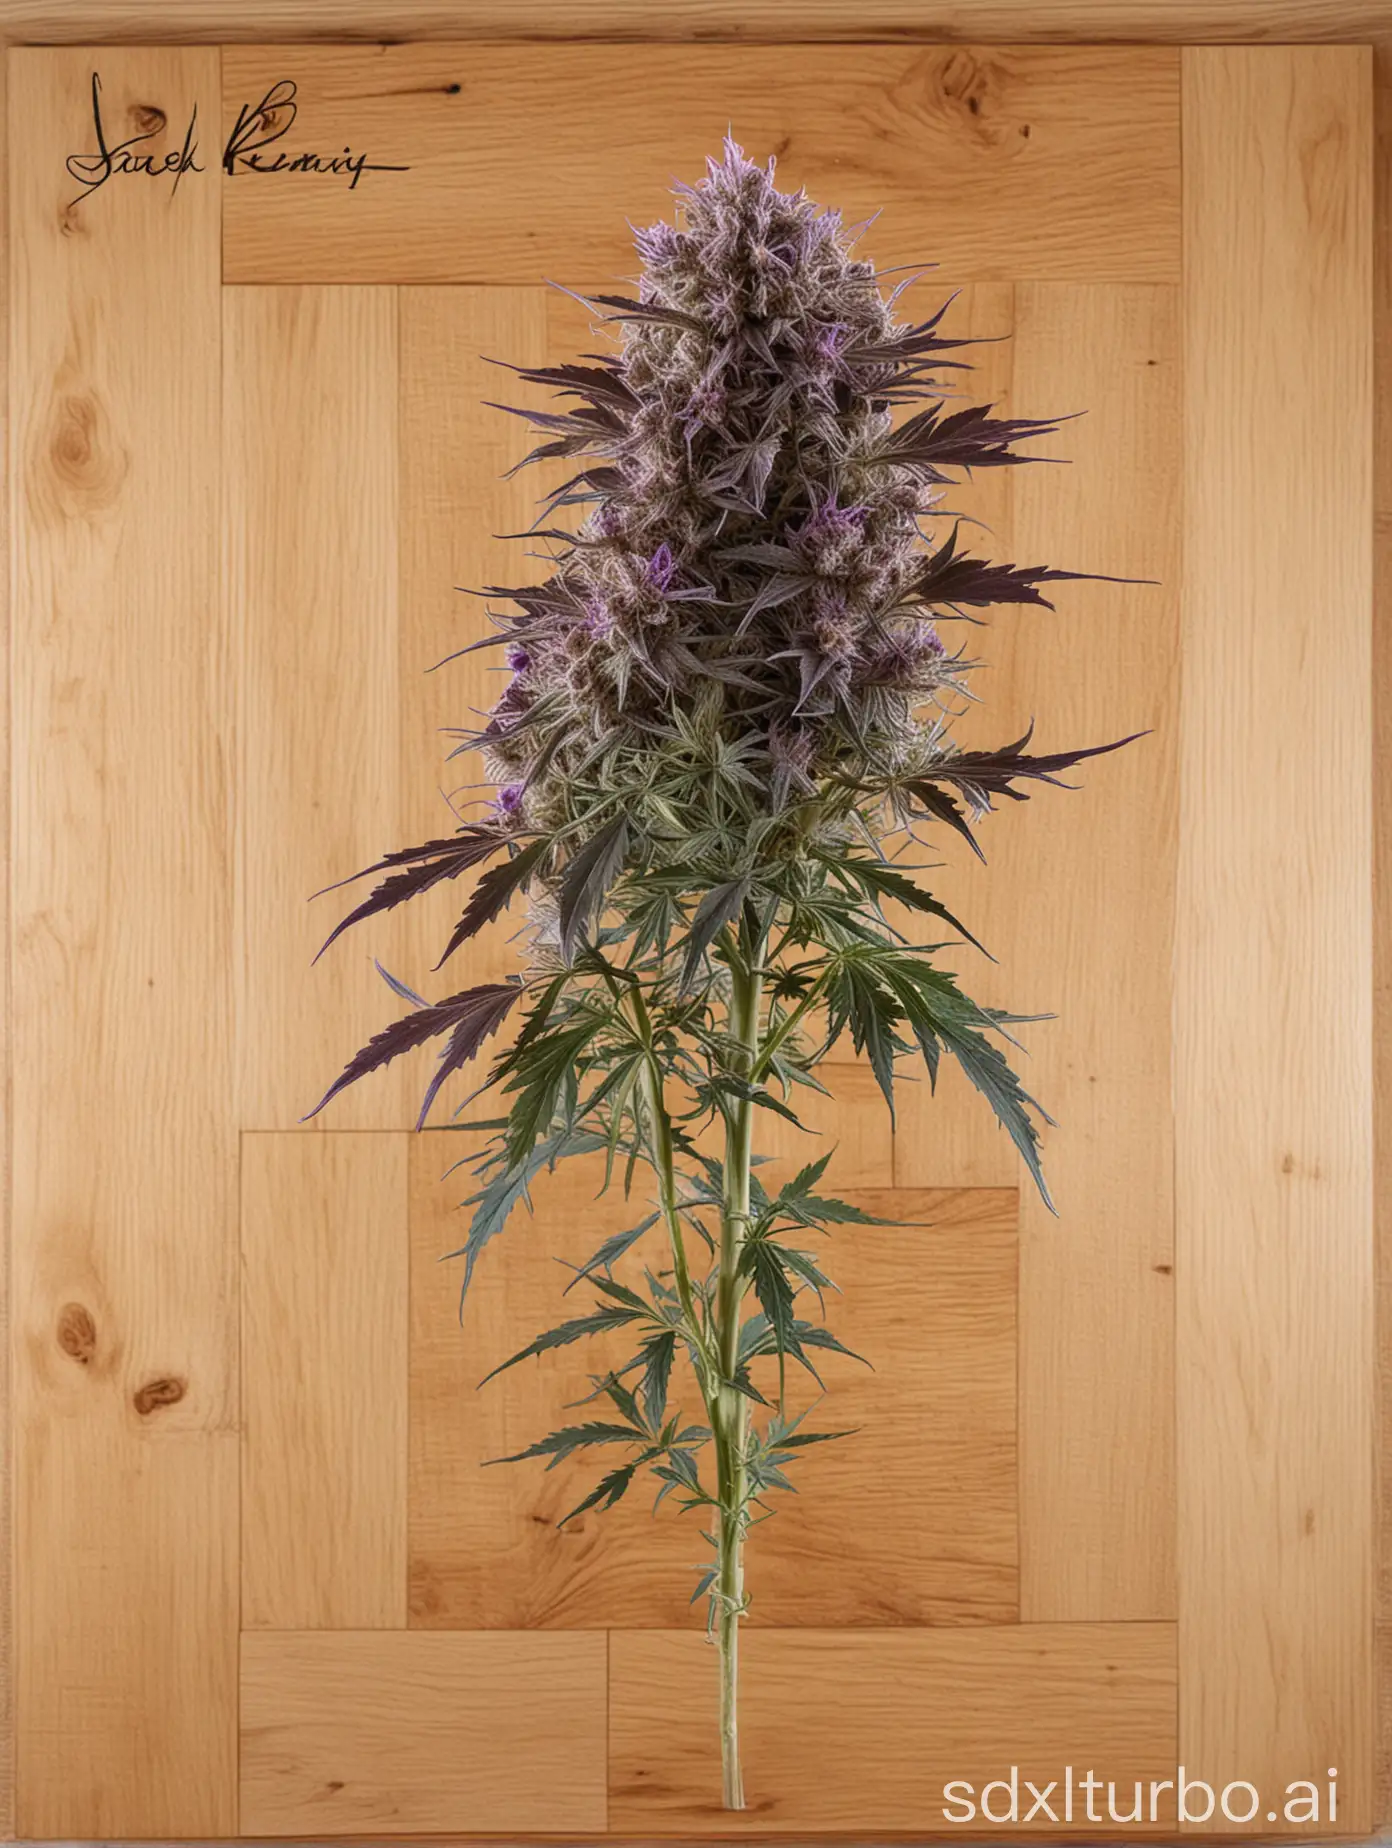 a beautiful cannabis plant; purple haze; main stem; plant is arranged on the left edge of the image and is only half visible; background in lightened oak wood design; Top right reads: "Jack, Queen, King, Grass"